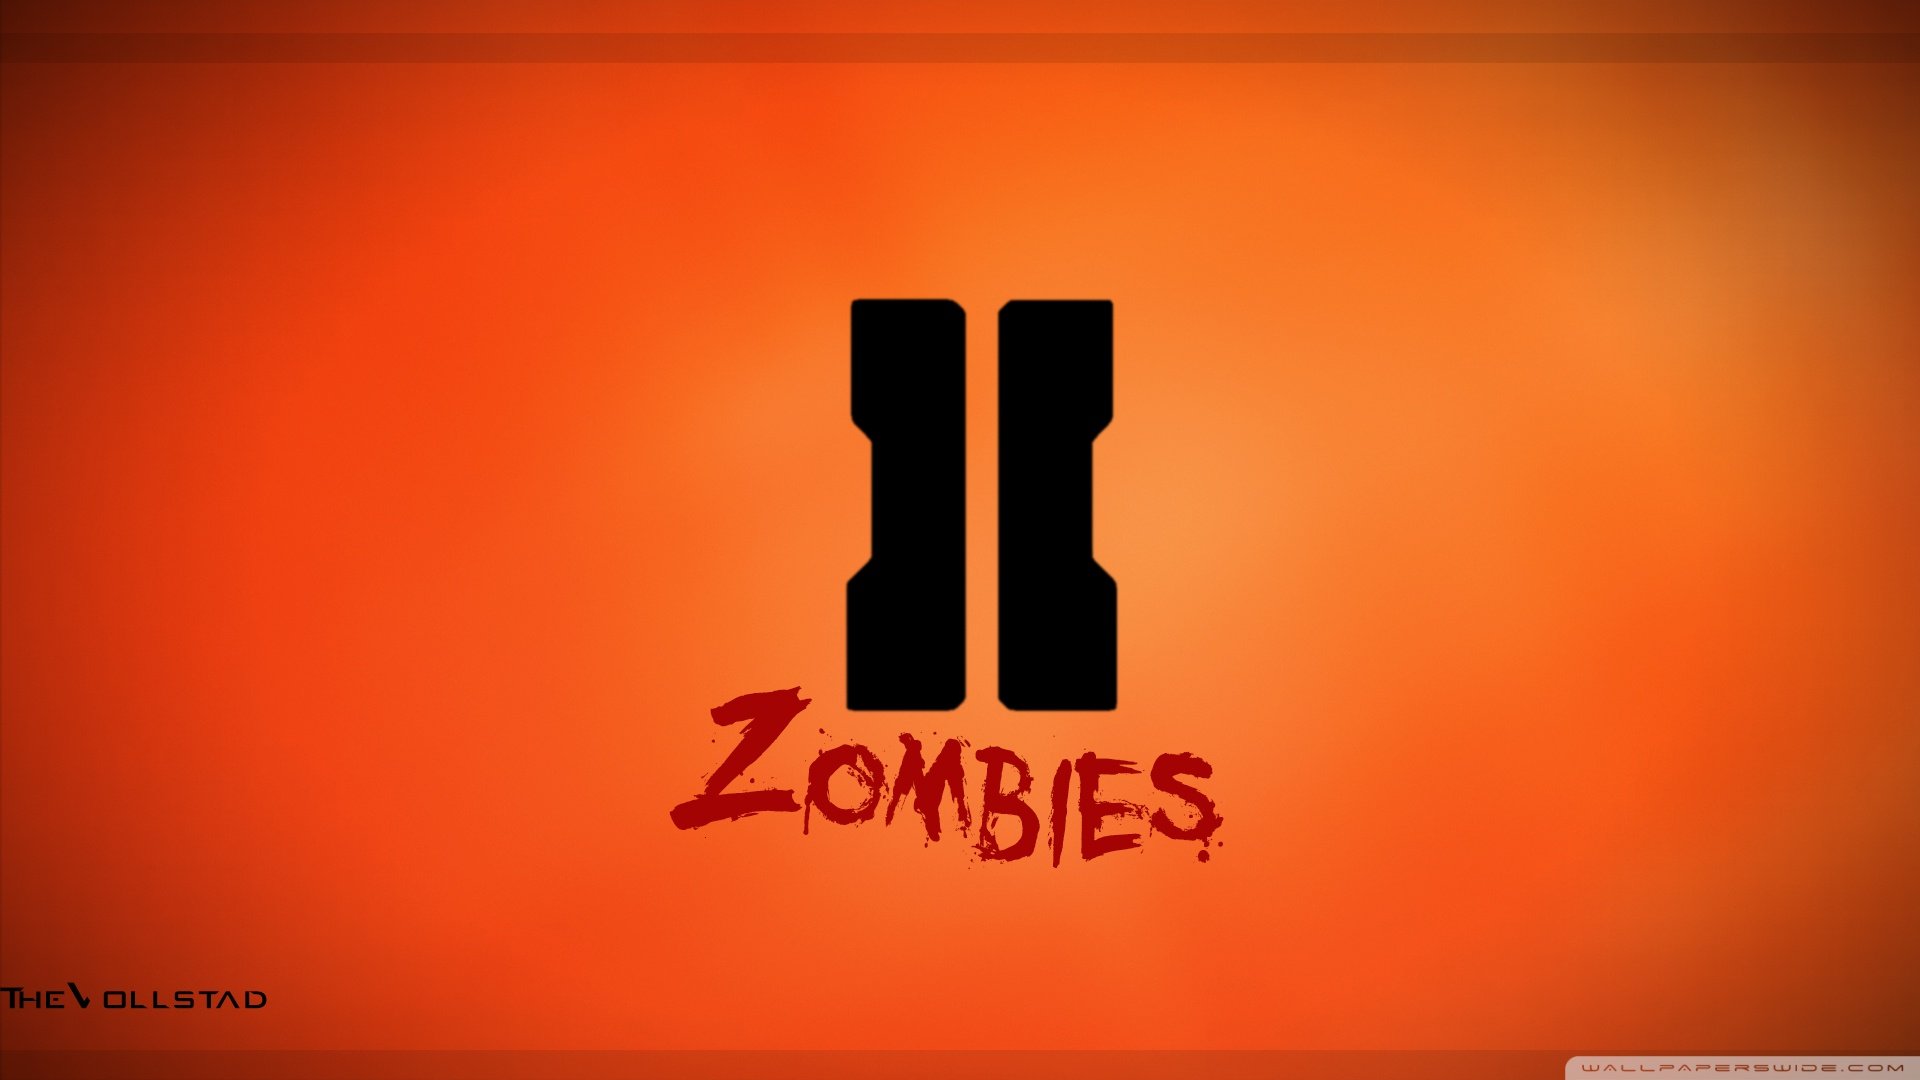 Call of duty black ops 2 zombies wallpaper